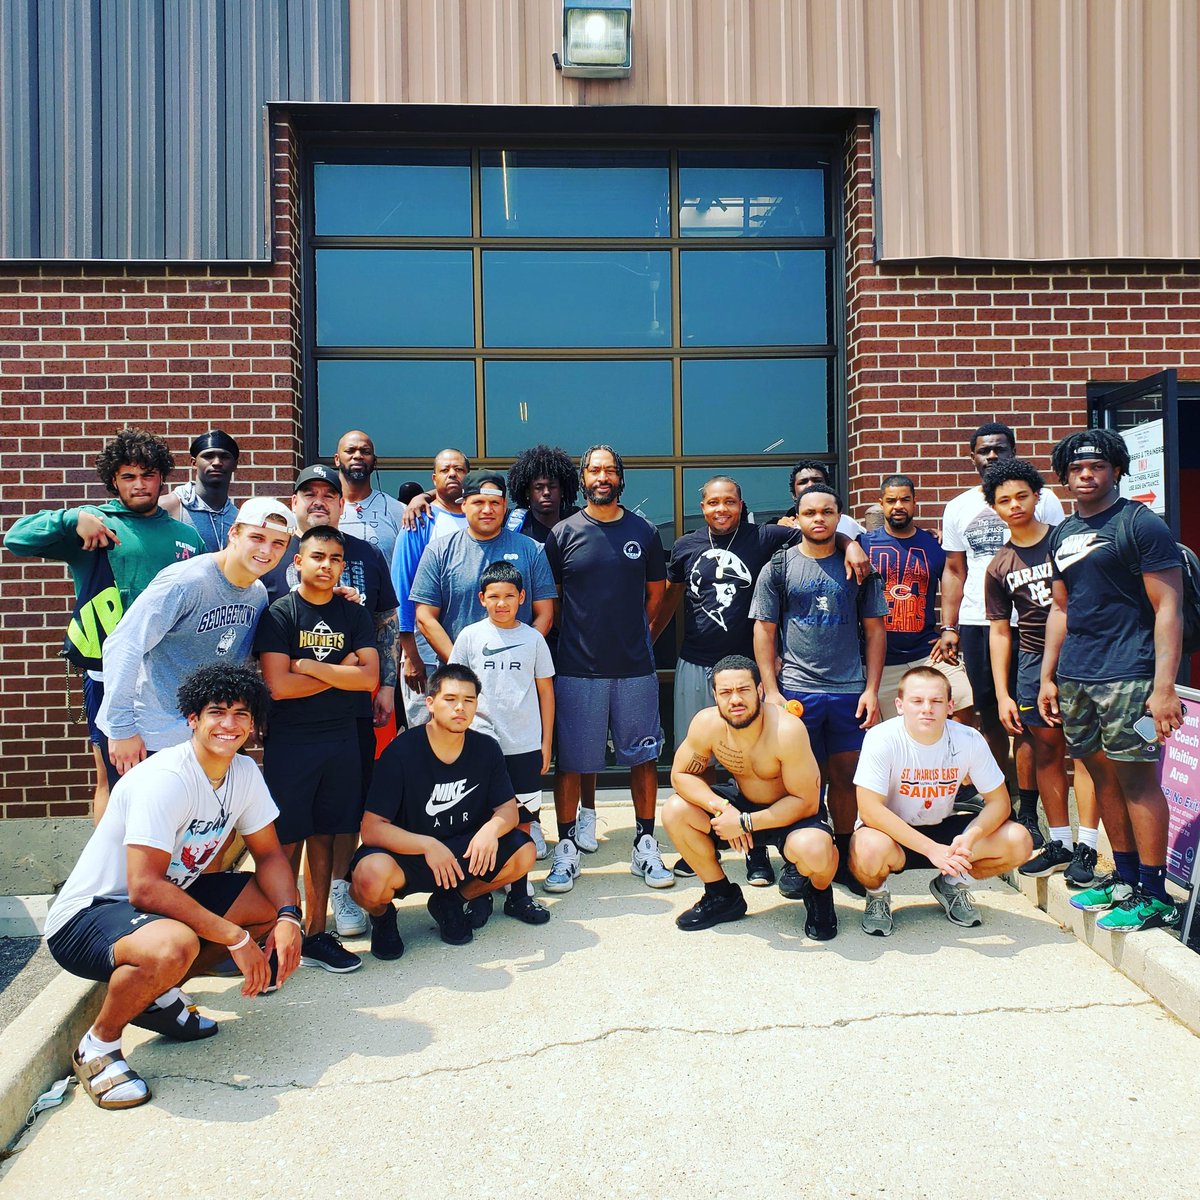 On Father's Day weekend we wouldn't have celebrated it any other way! We gave a shout out to the Dads in our AK Running Back Position Training Session! These guys wouldn't be great without your support and guidance! #AKTraining #DatWerk #BuildingBetterBallers 🕹🎮🔝⛓️